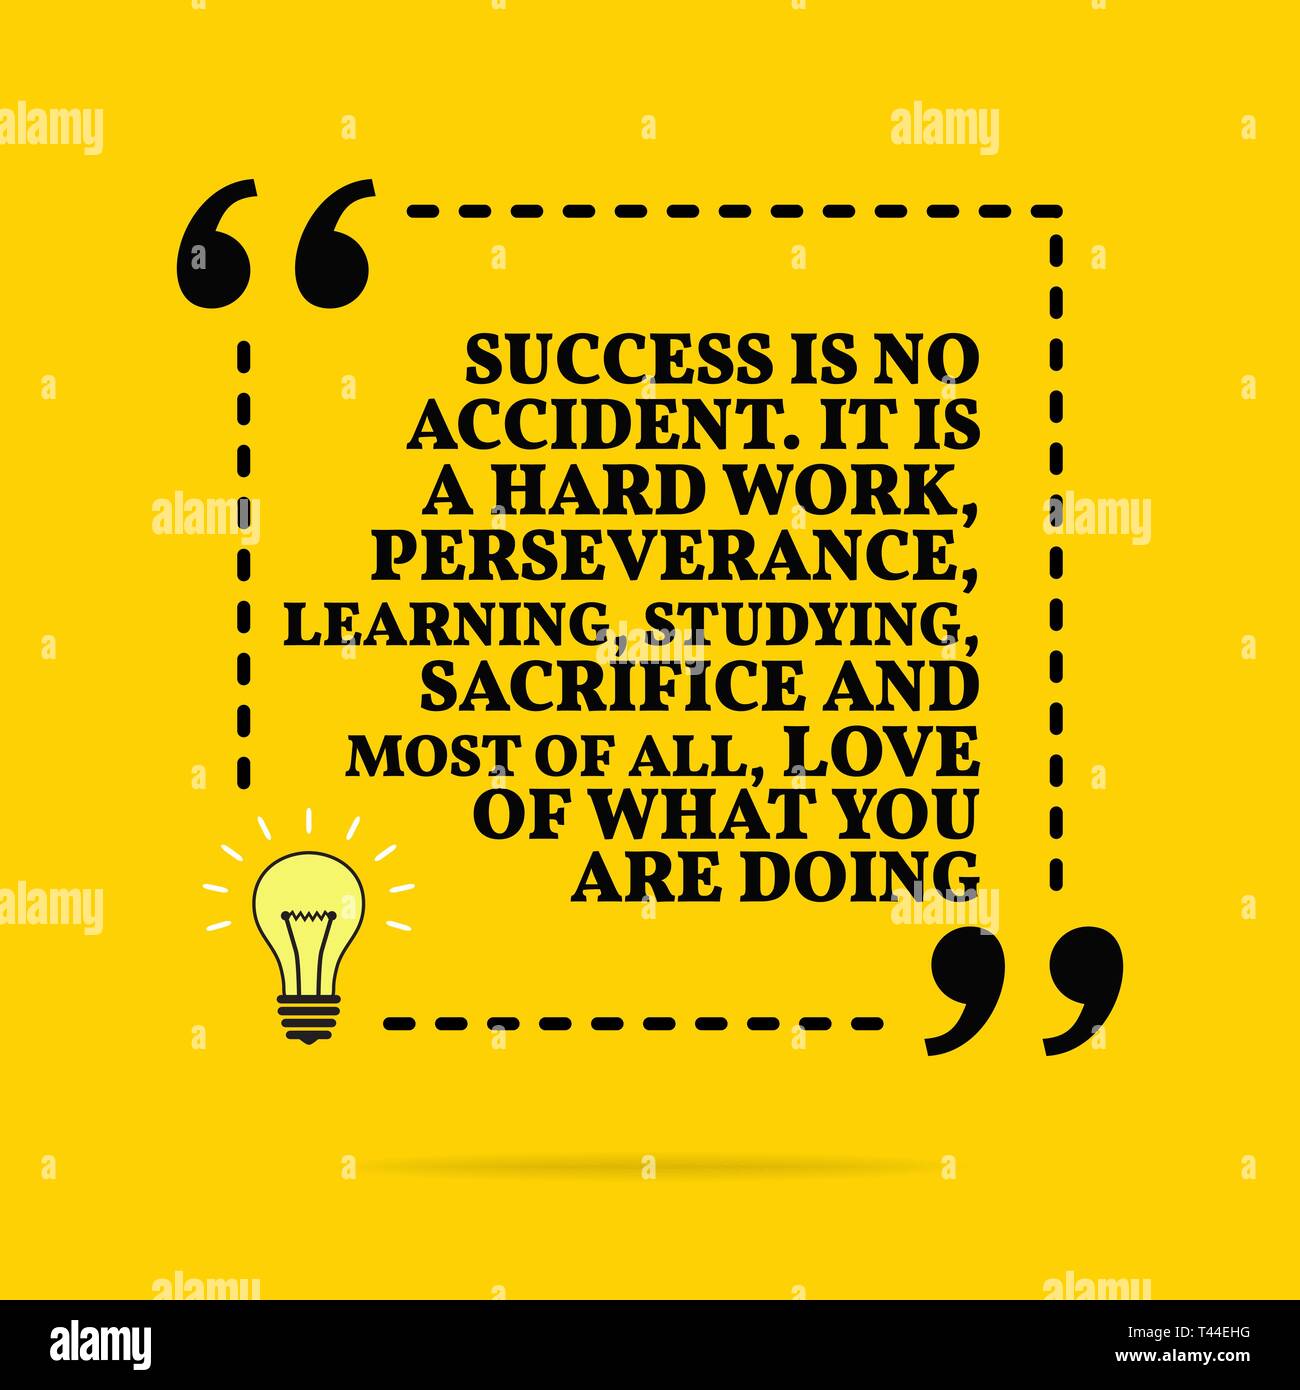 Motivational Quotes For Success In Work